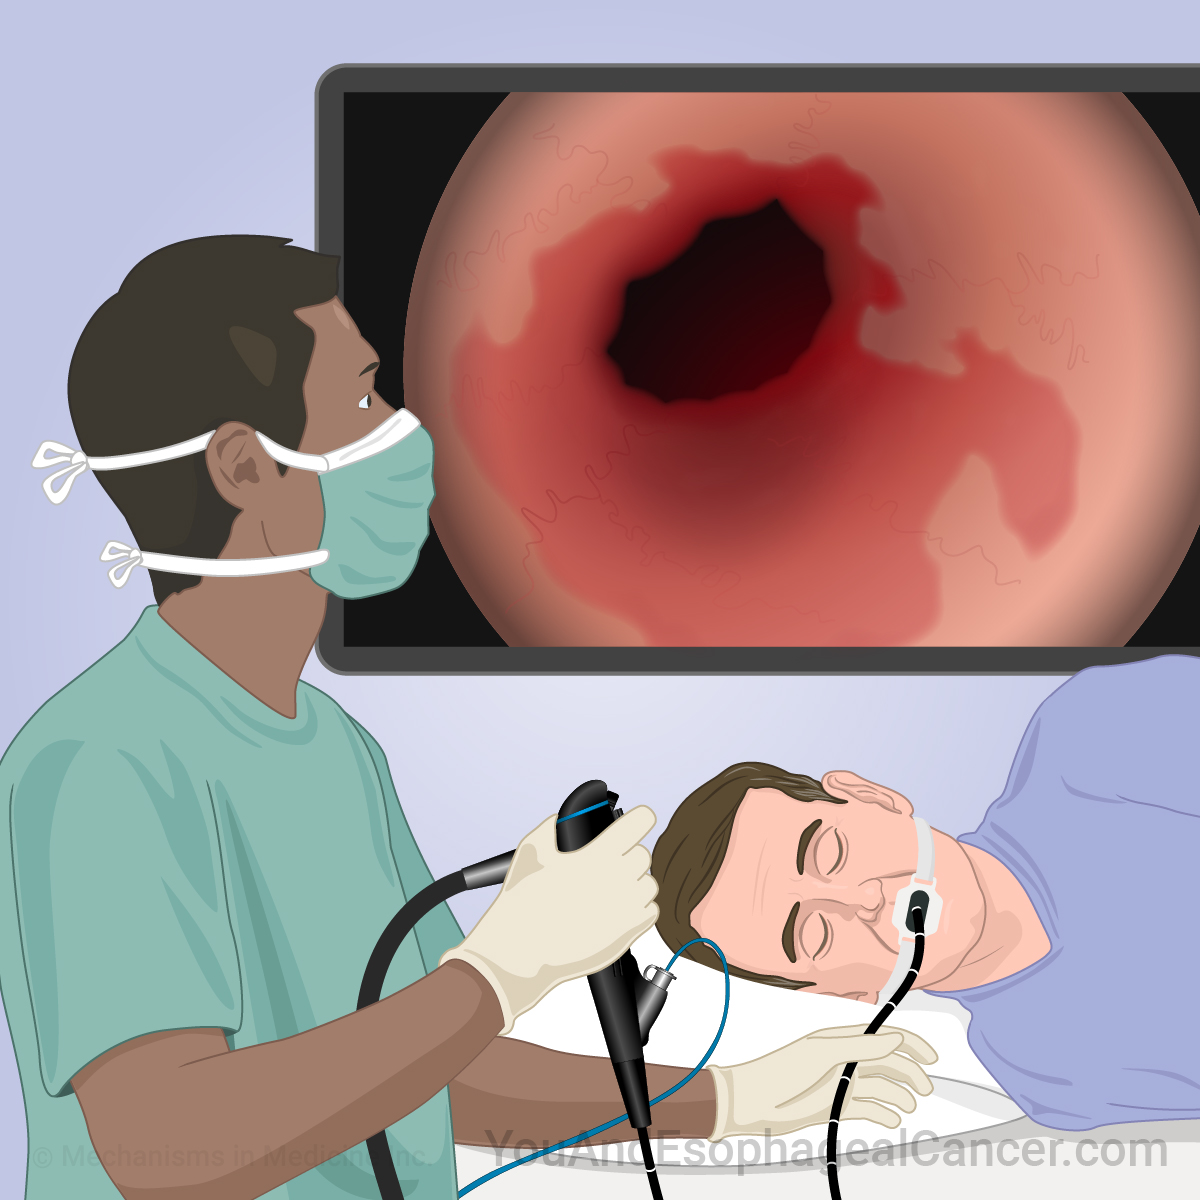 Learn about a variety of topics on Esophageal Cancer through short animations